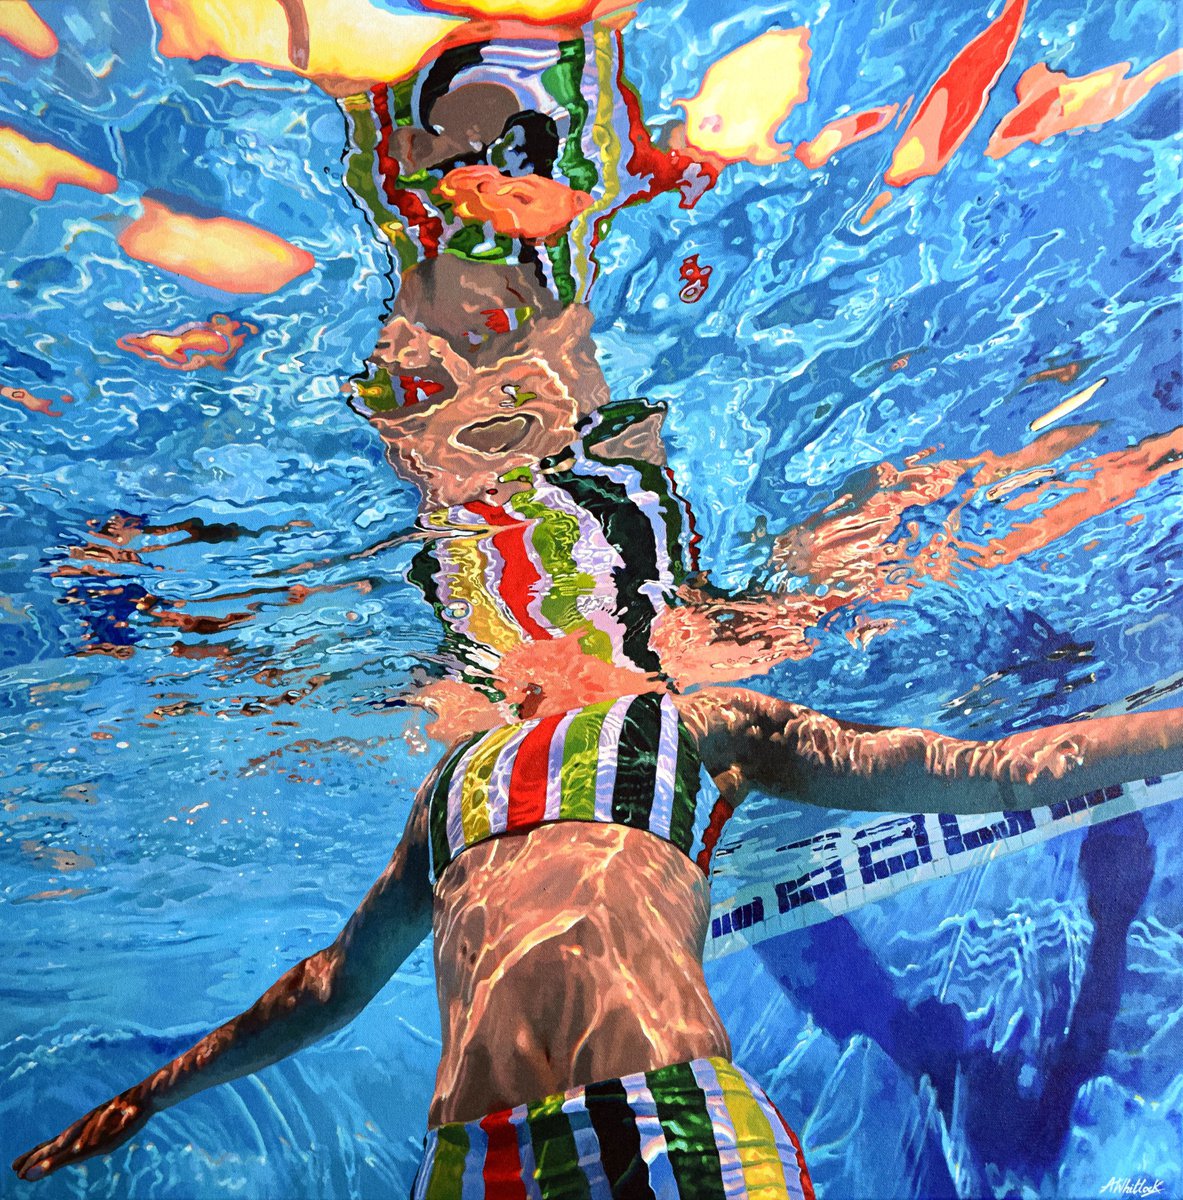 Supernova - Large Swimming Painting by Abi Whitlock